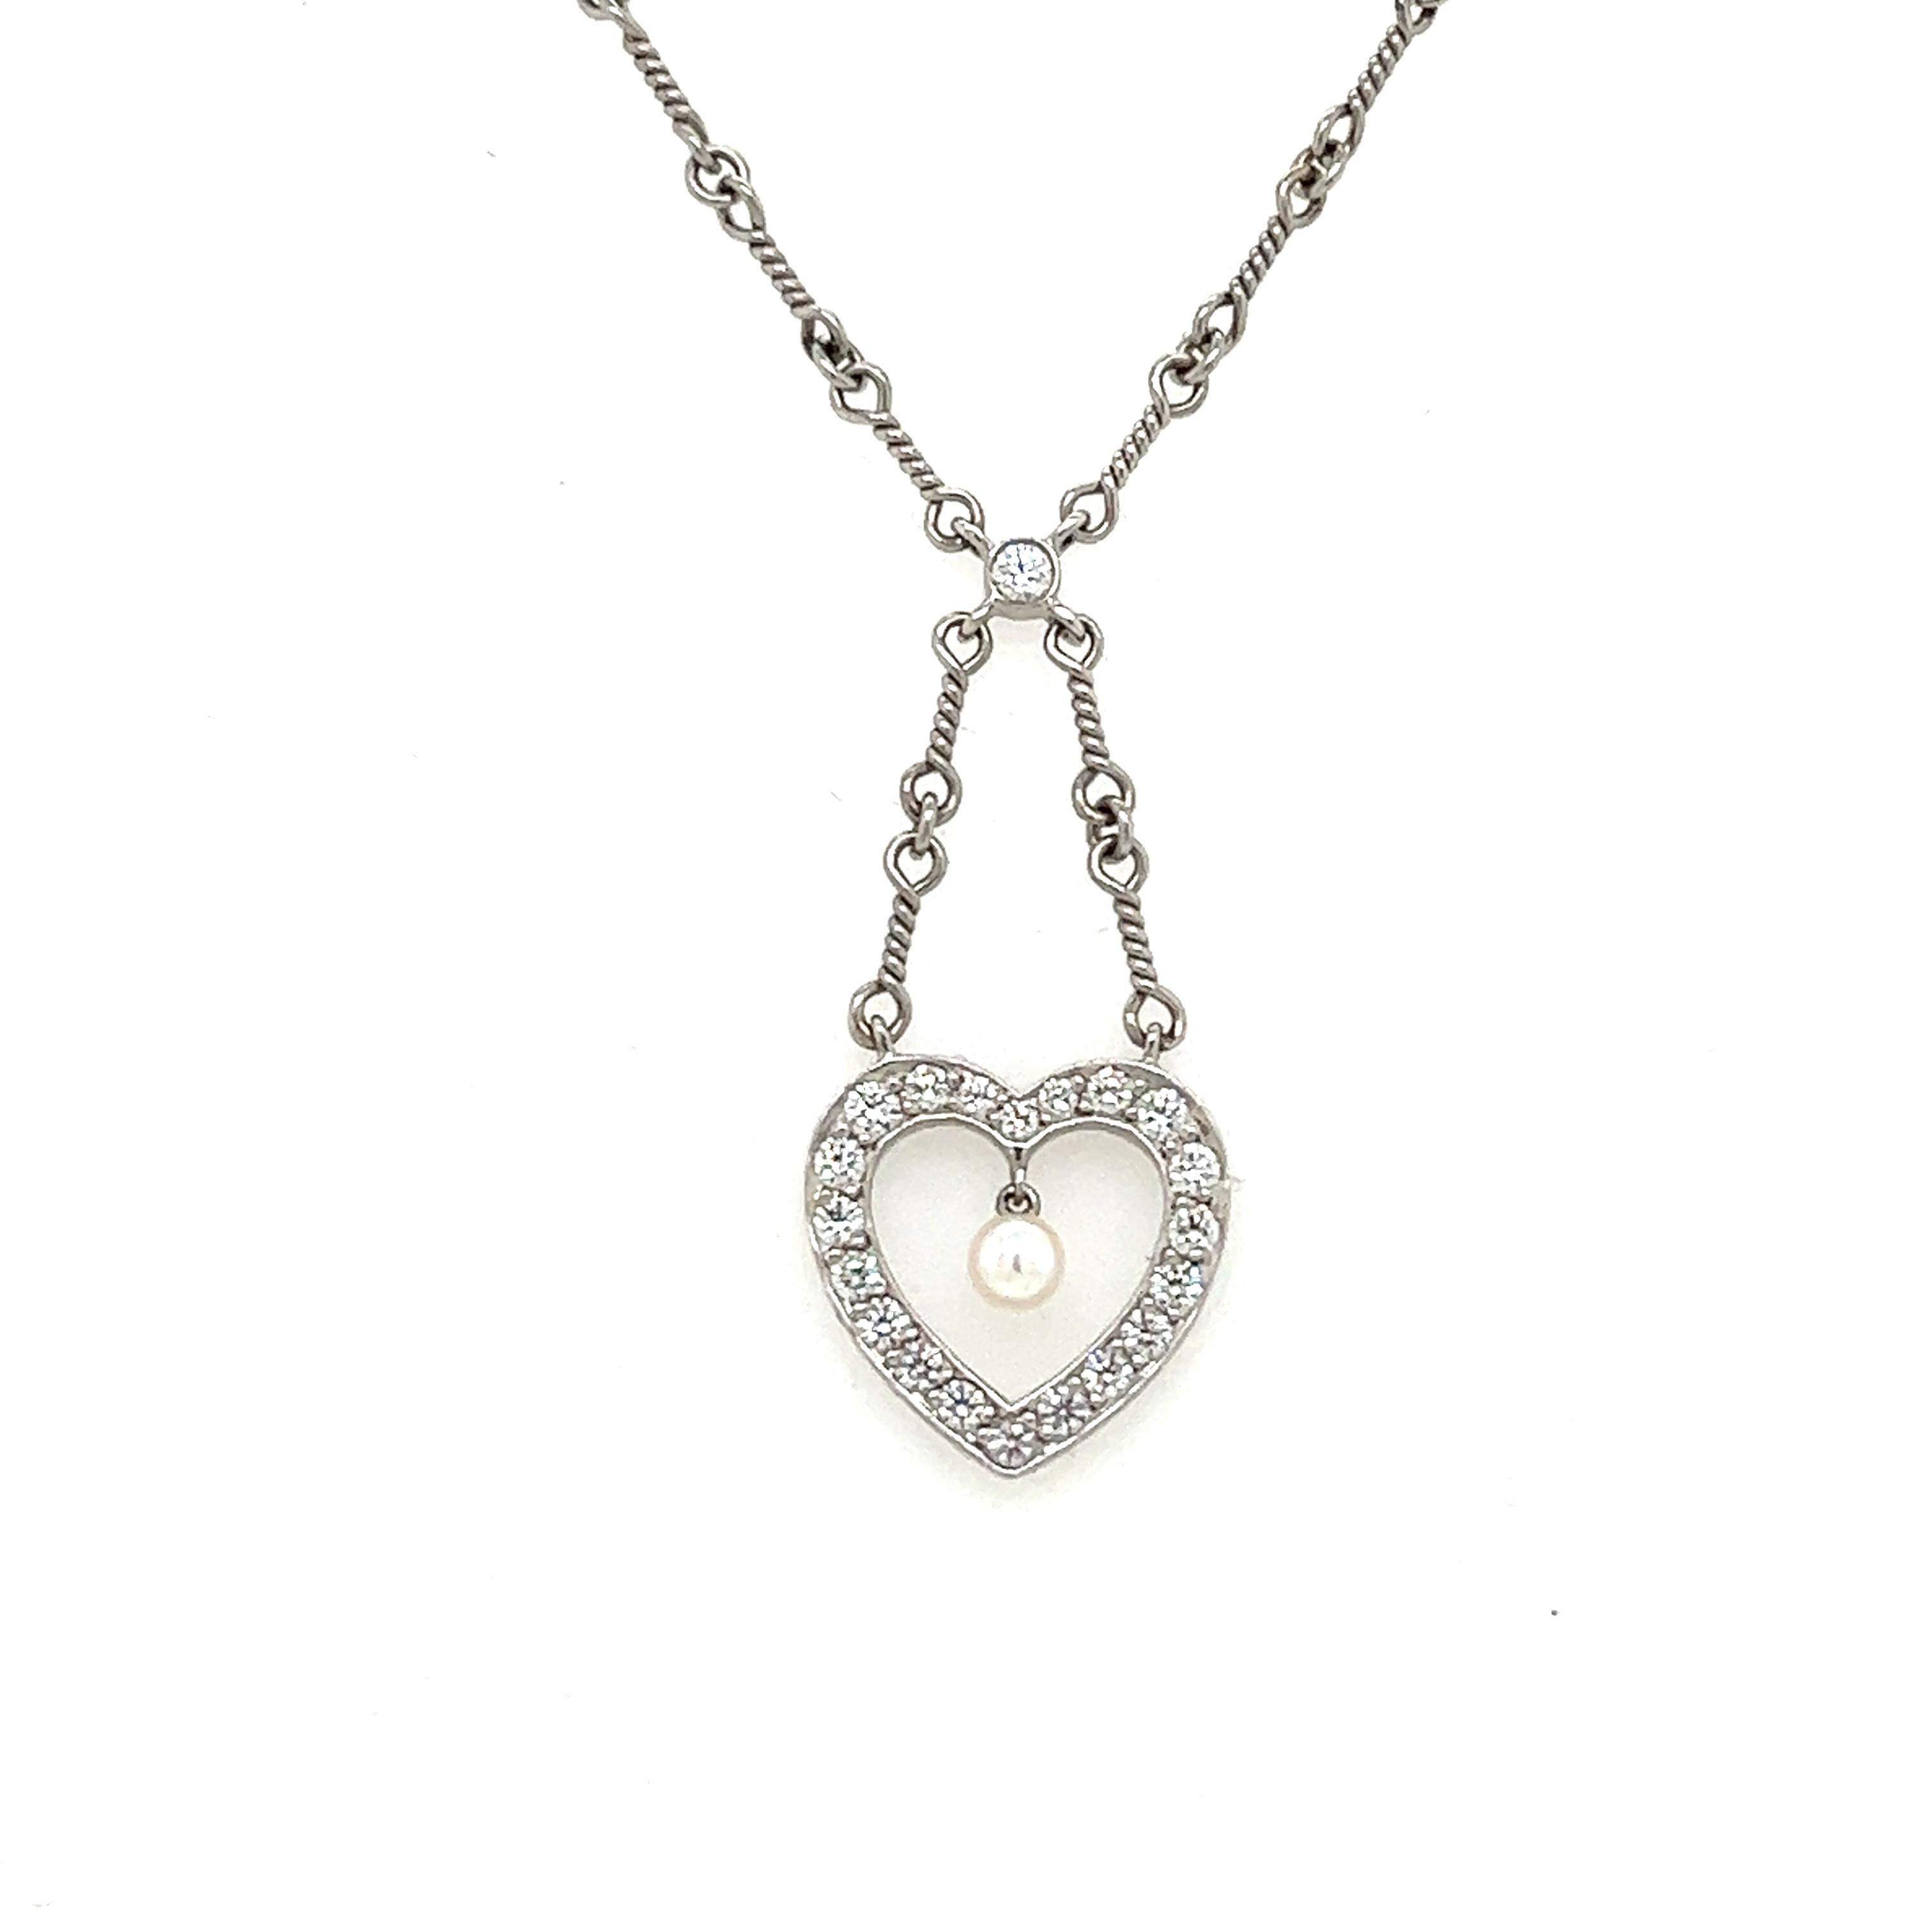   Beautifully crafted necklace by famed designer Tiffany & Co. The necklace is crafted in platinum and showcases a unique wire wrap link that is sure to stand out when worn. 
  The necklace is highlighted with a bezel set diamond that leads to a